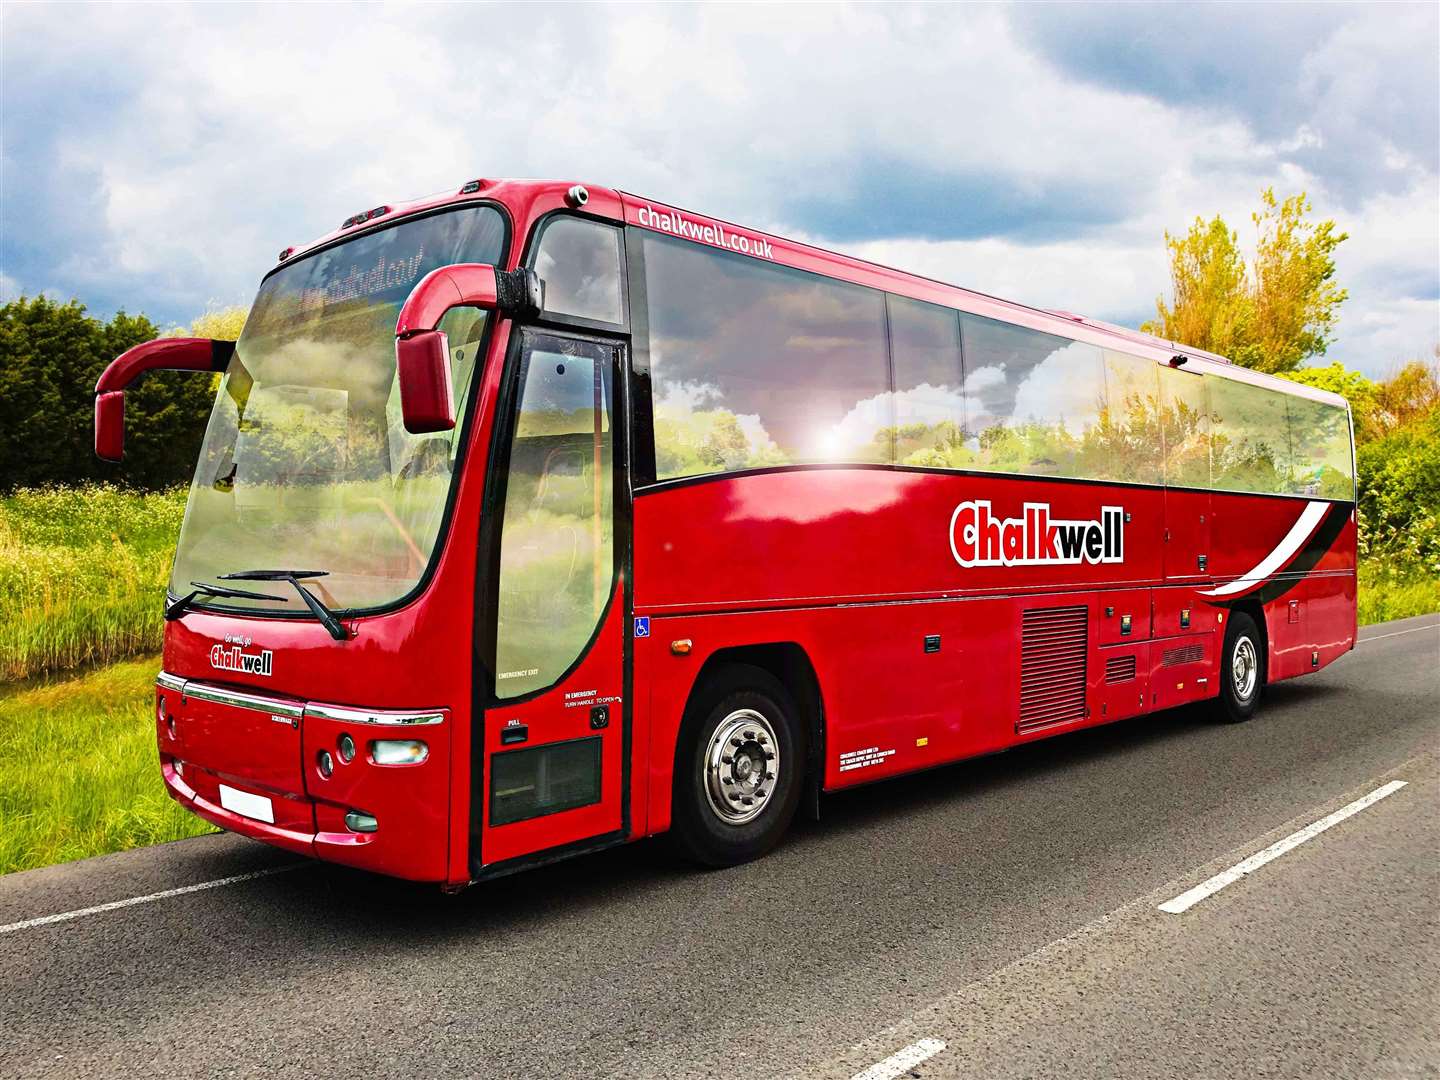 A Chalkwell Coach Hire vehicle based at Sittingbourne. Picture: Chalkwell Coach Hire